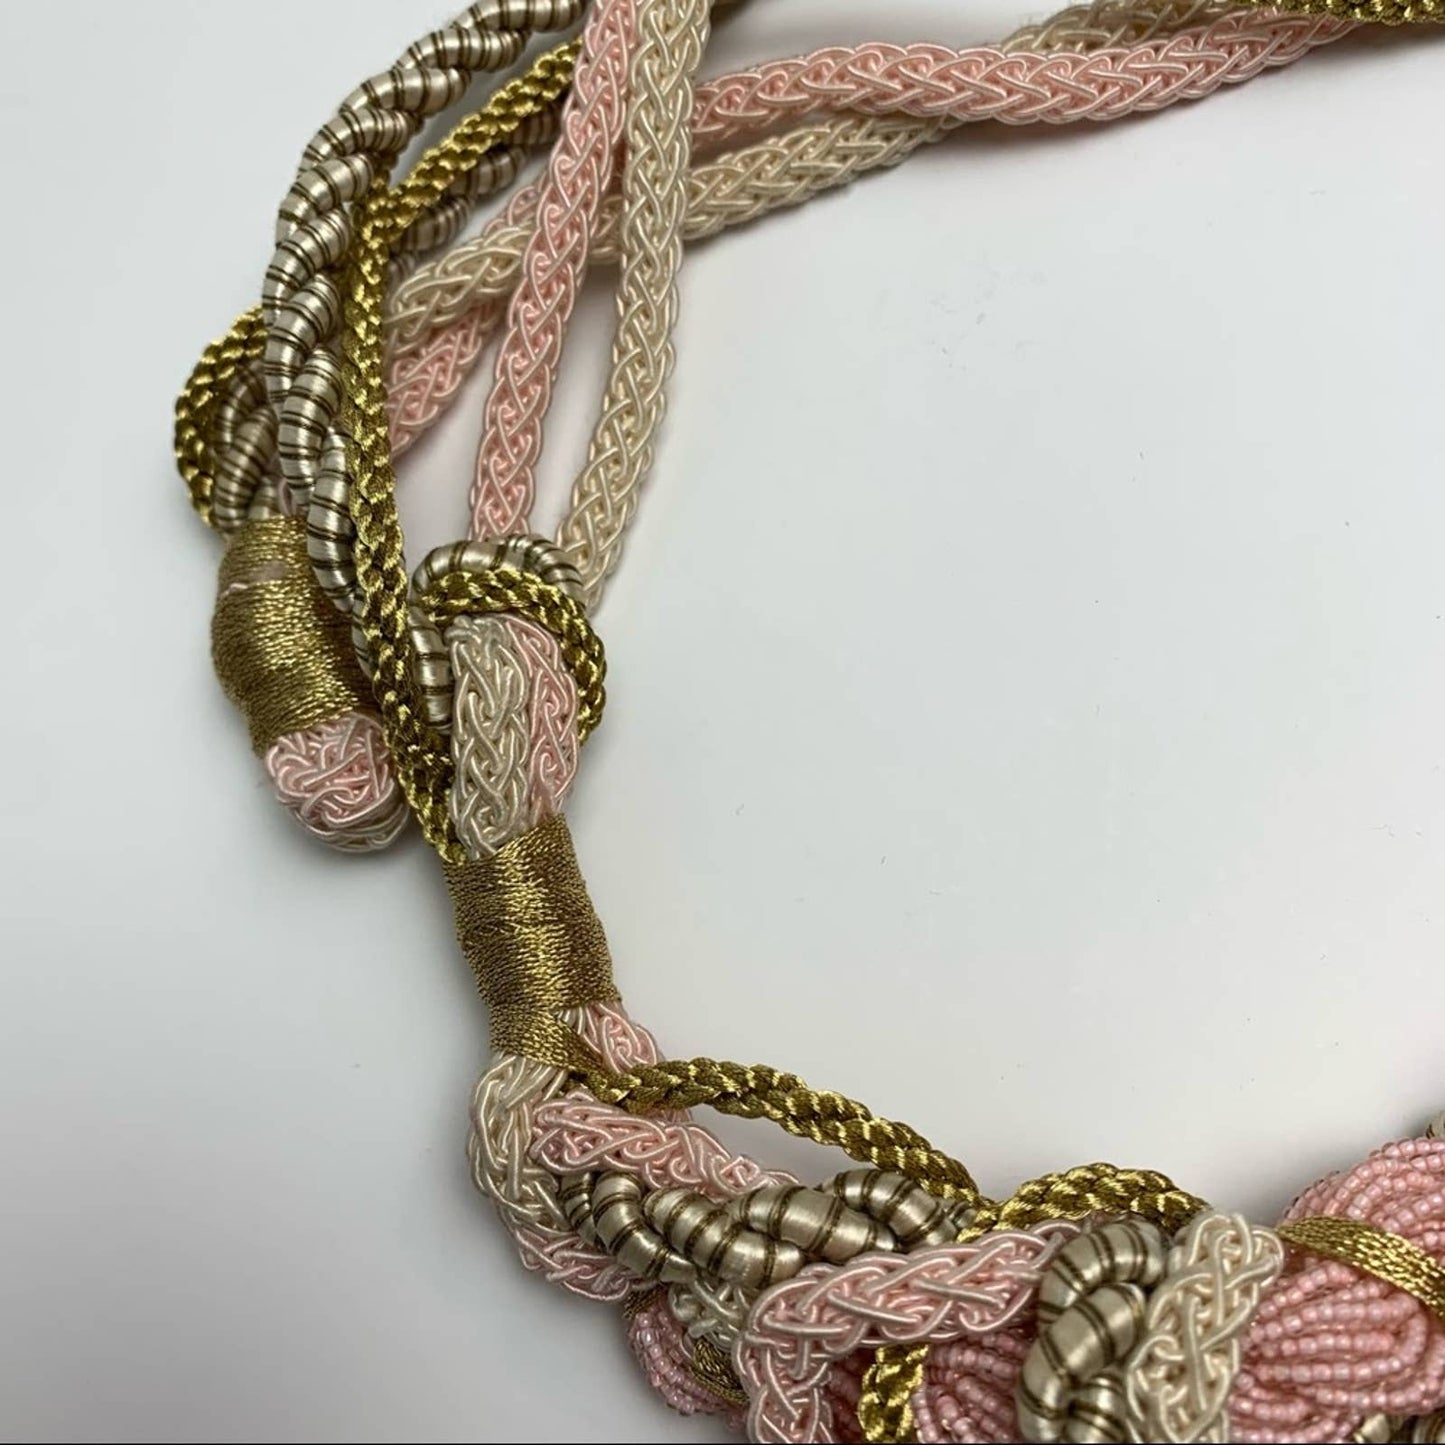 Vintage 70s 80s Beaded Braided Rope Belt Pink Gold Statement Cord